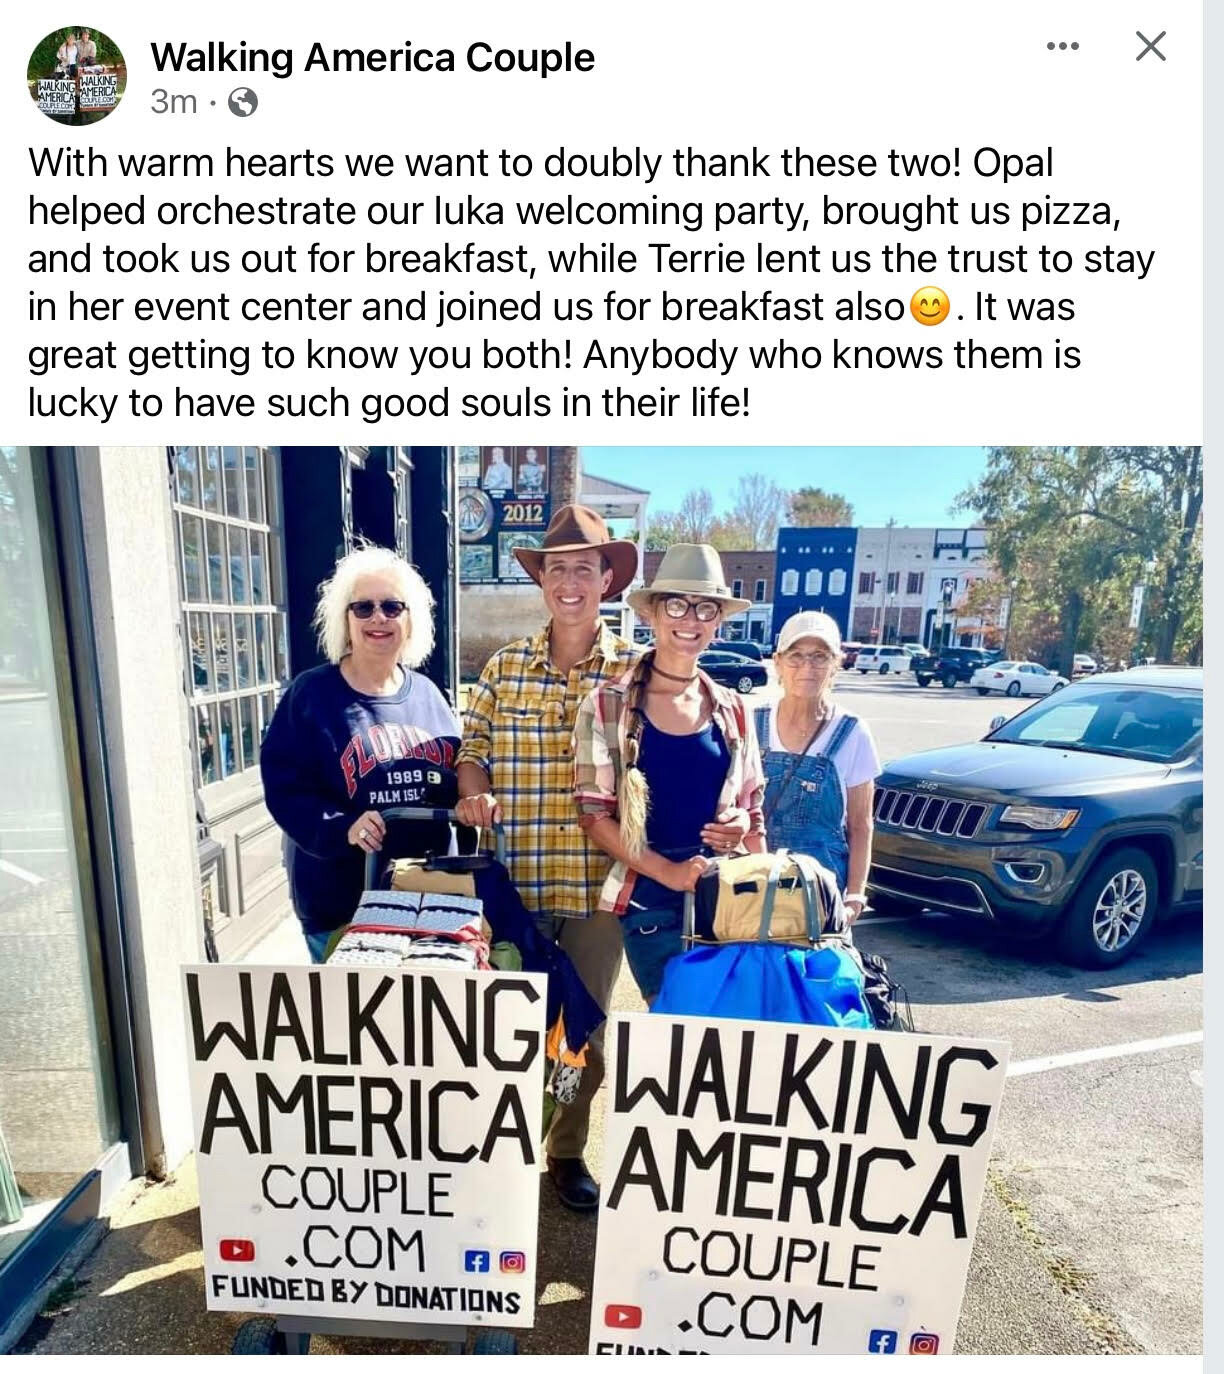 The Facebook Post the Couple Made Regarding the Welcoming.